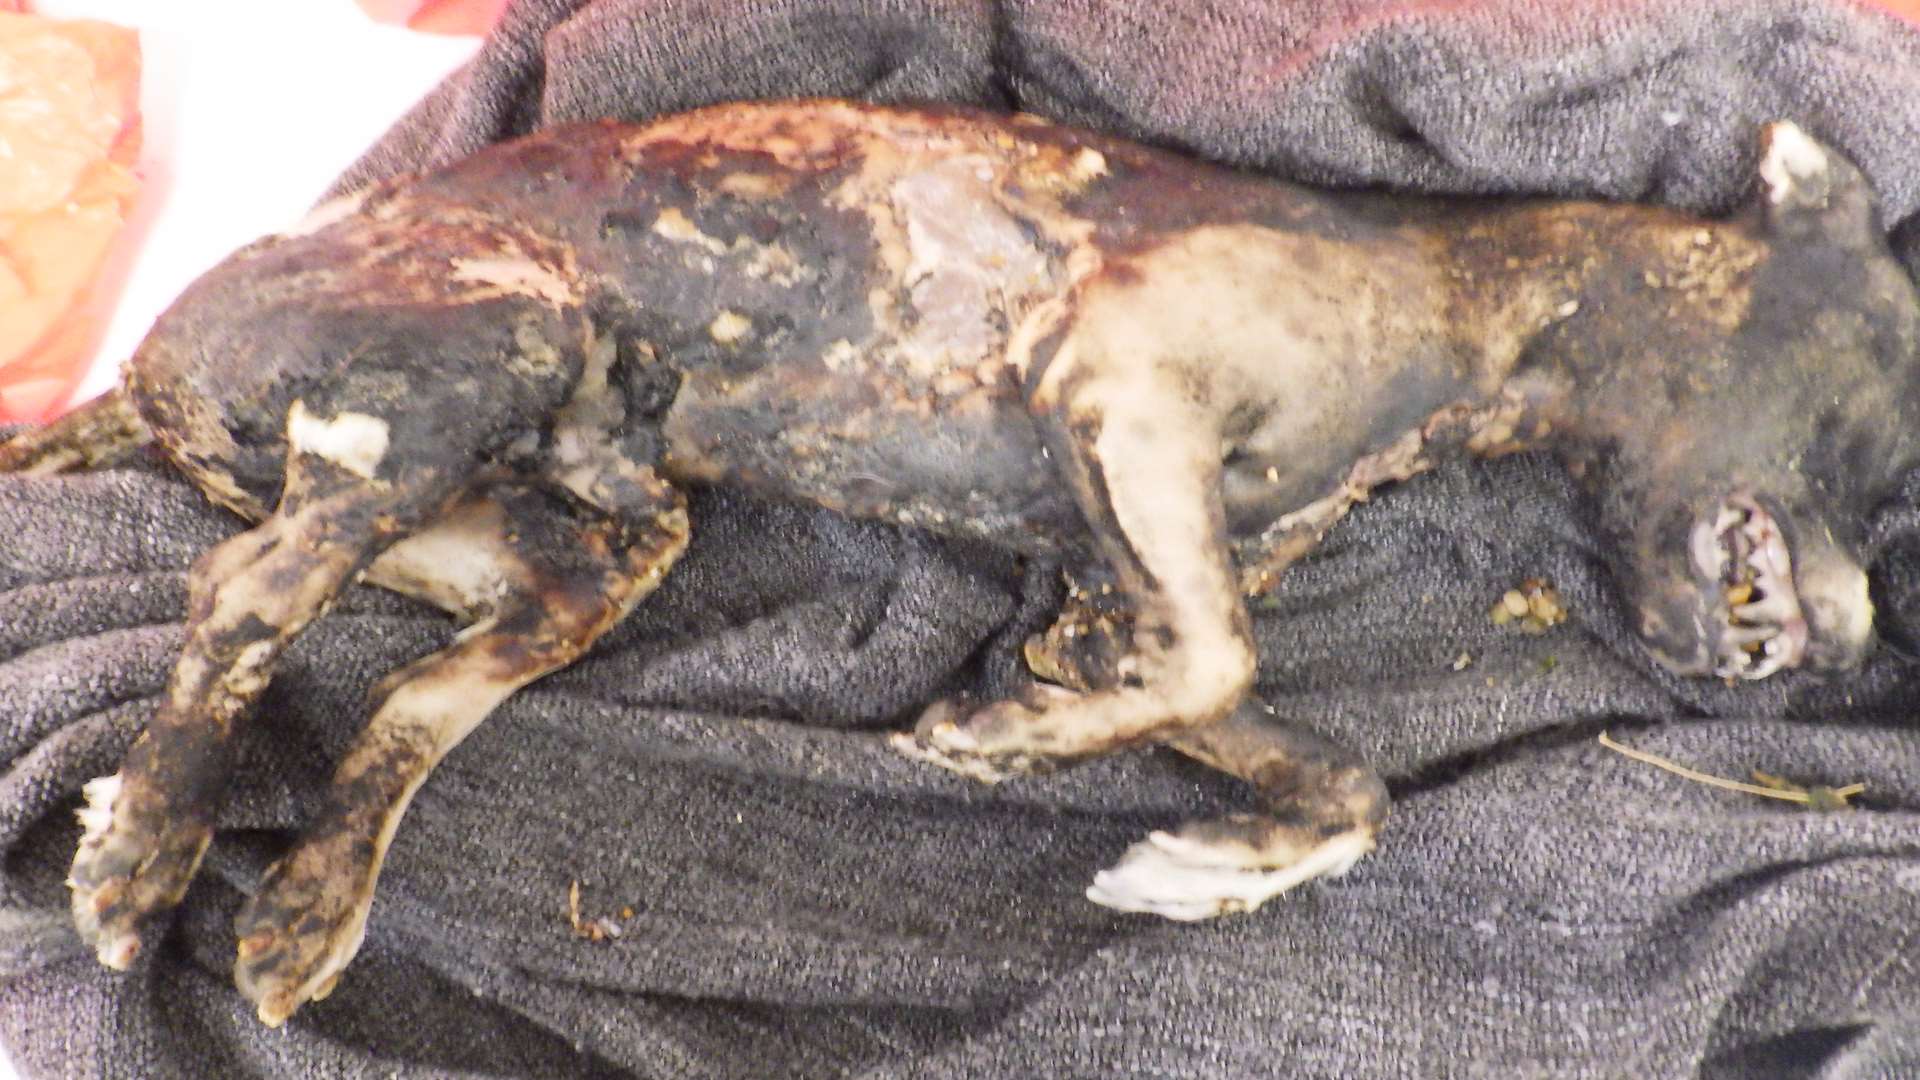 A dead dog, believed to have been burnt, was found on the beach.